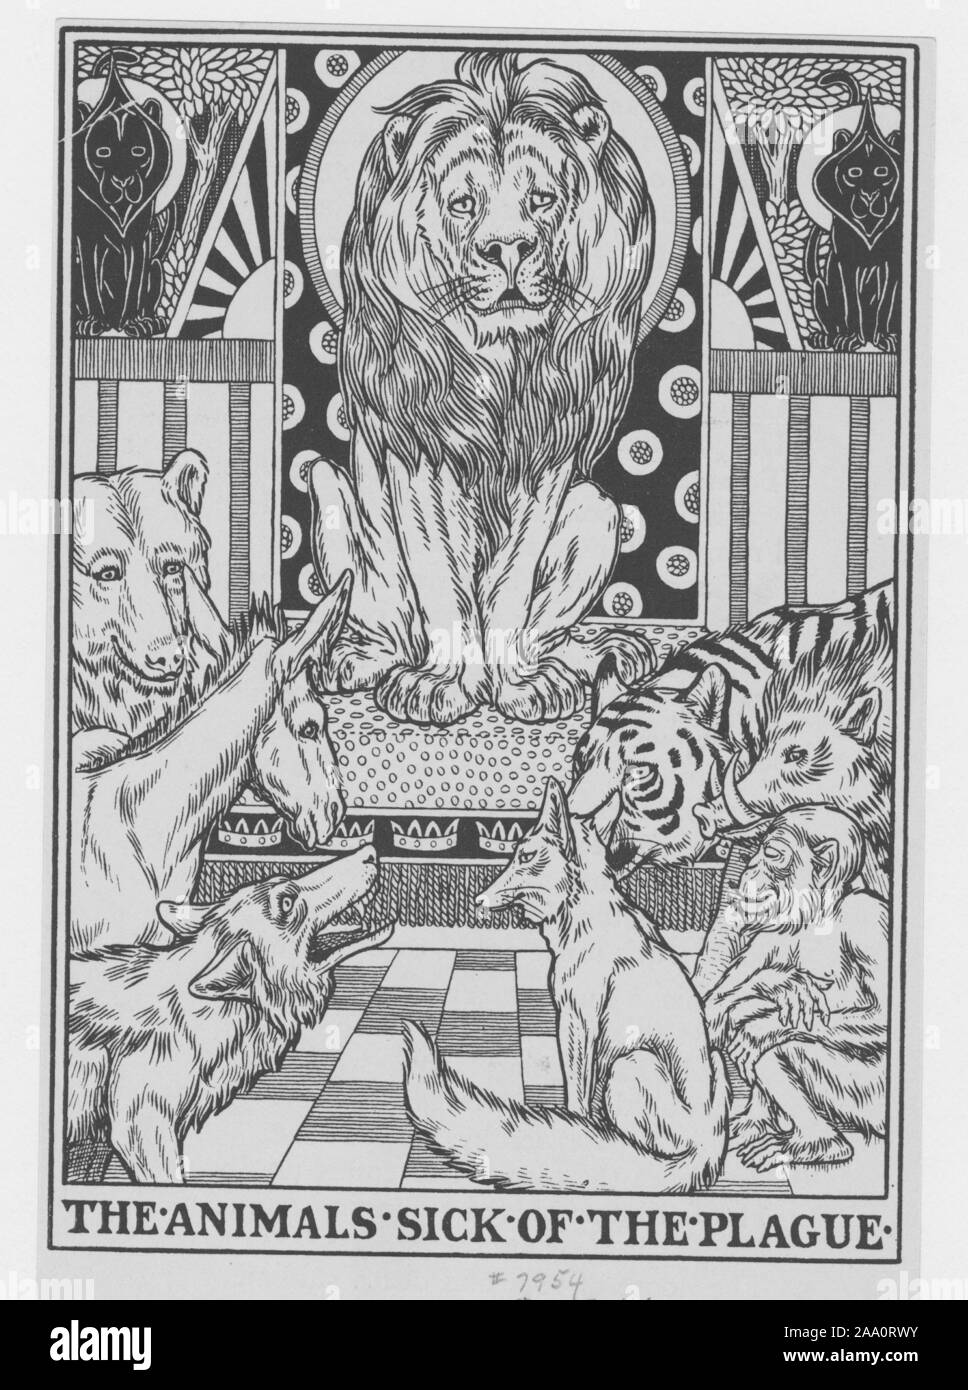 Monochrome illustration of a scene from the book 'A Hundred Fables of La Fontaine' by author Jean de La Fontaine, featuring a lion, a tiger and various other animals sick with the plague, illustrated by Percy J Billinghurst, published by John Lane, 1900. From the New York Public Library. () Stock Photo